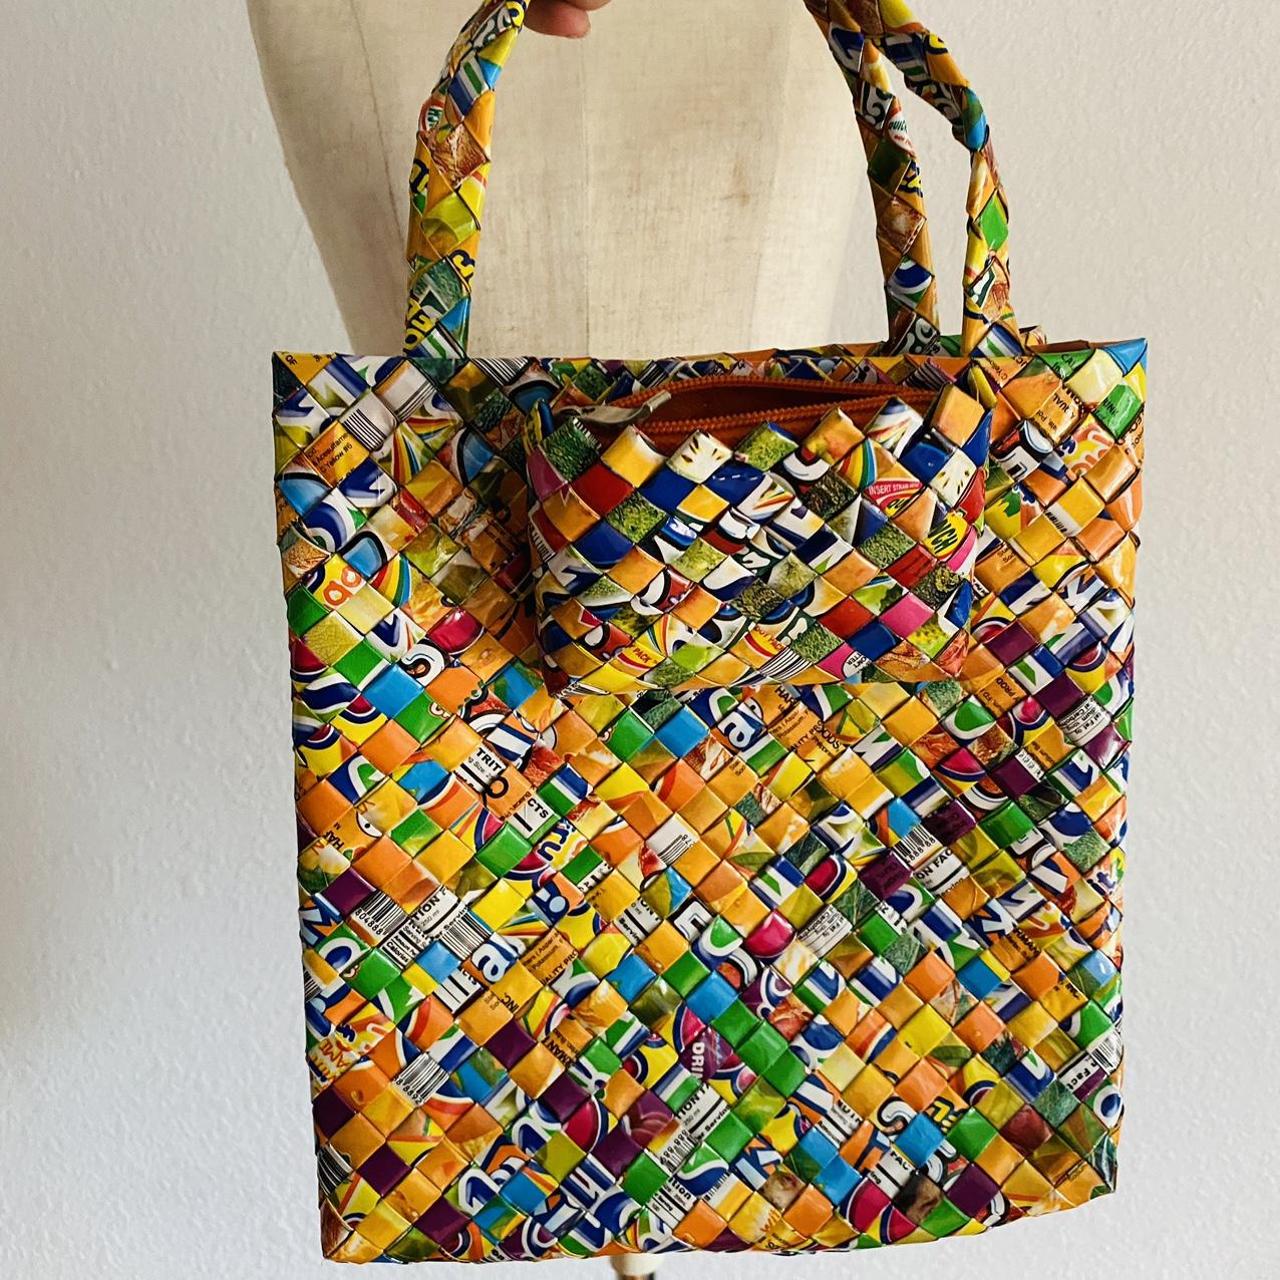 Gum/candy wrapper purse, recycled - Gem